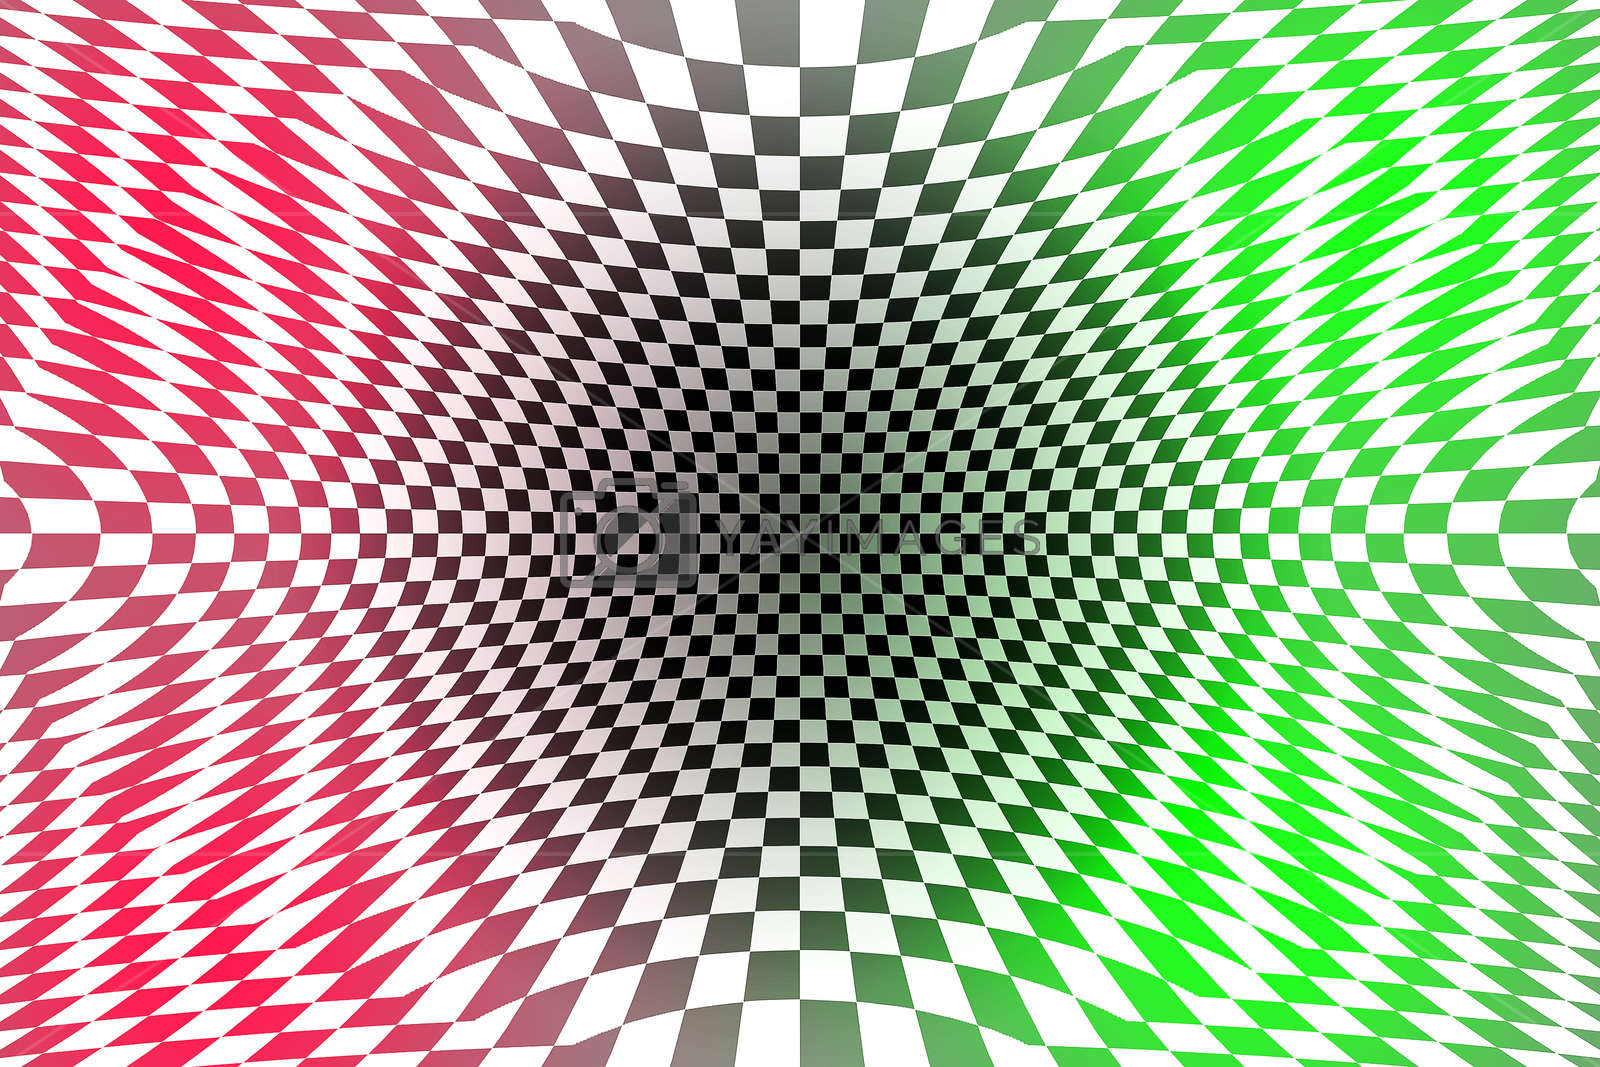 Illusion Design Background Wallpaper 4000 With 6000 - Black And White Checkerboard Distorted - HD Wallpaper 